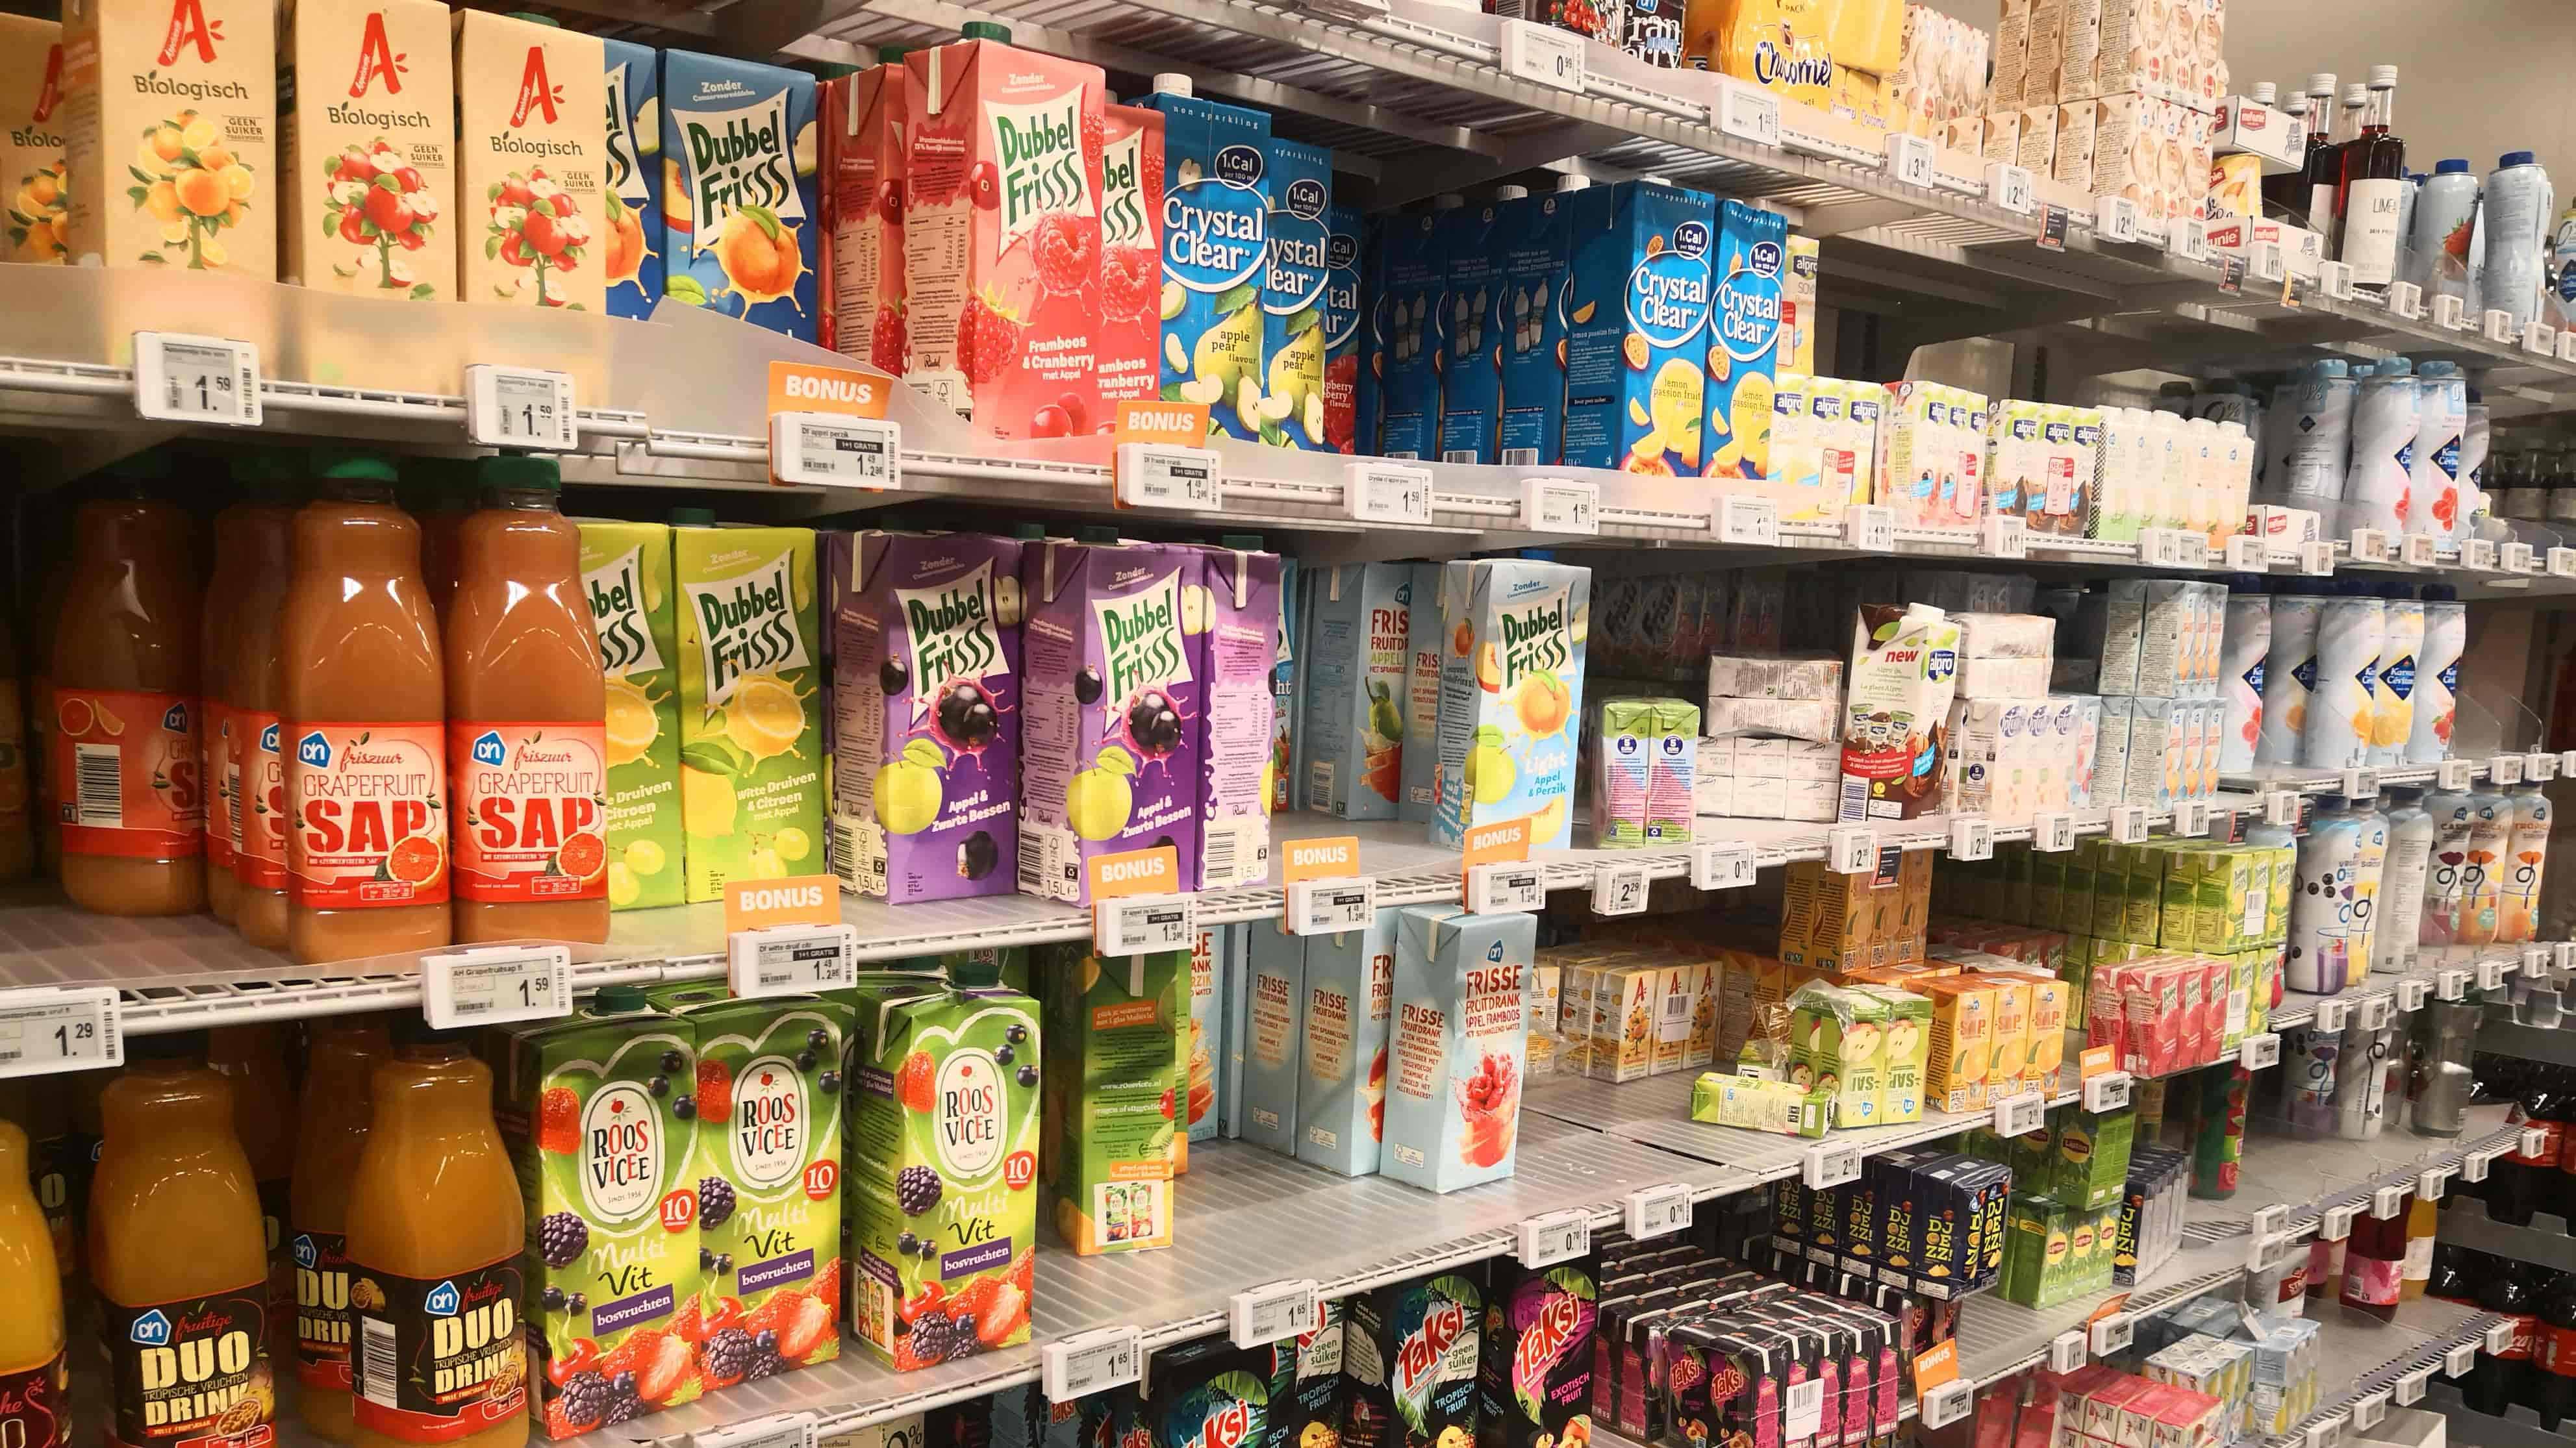 Electronic Shelf Labels Transforming US Retail – Here’s Why